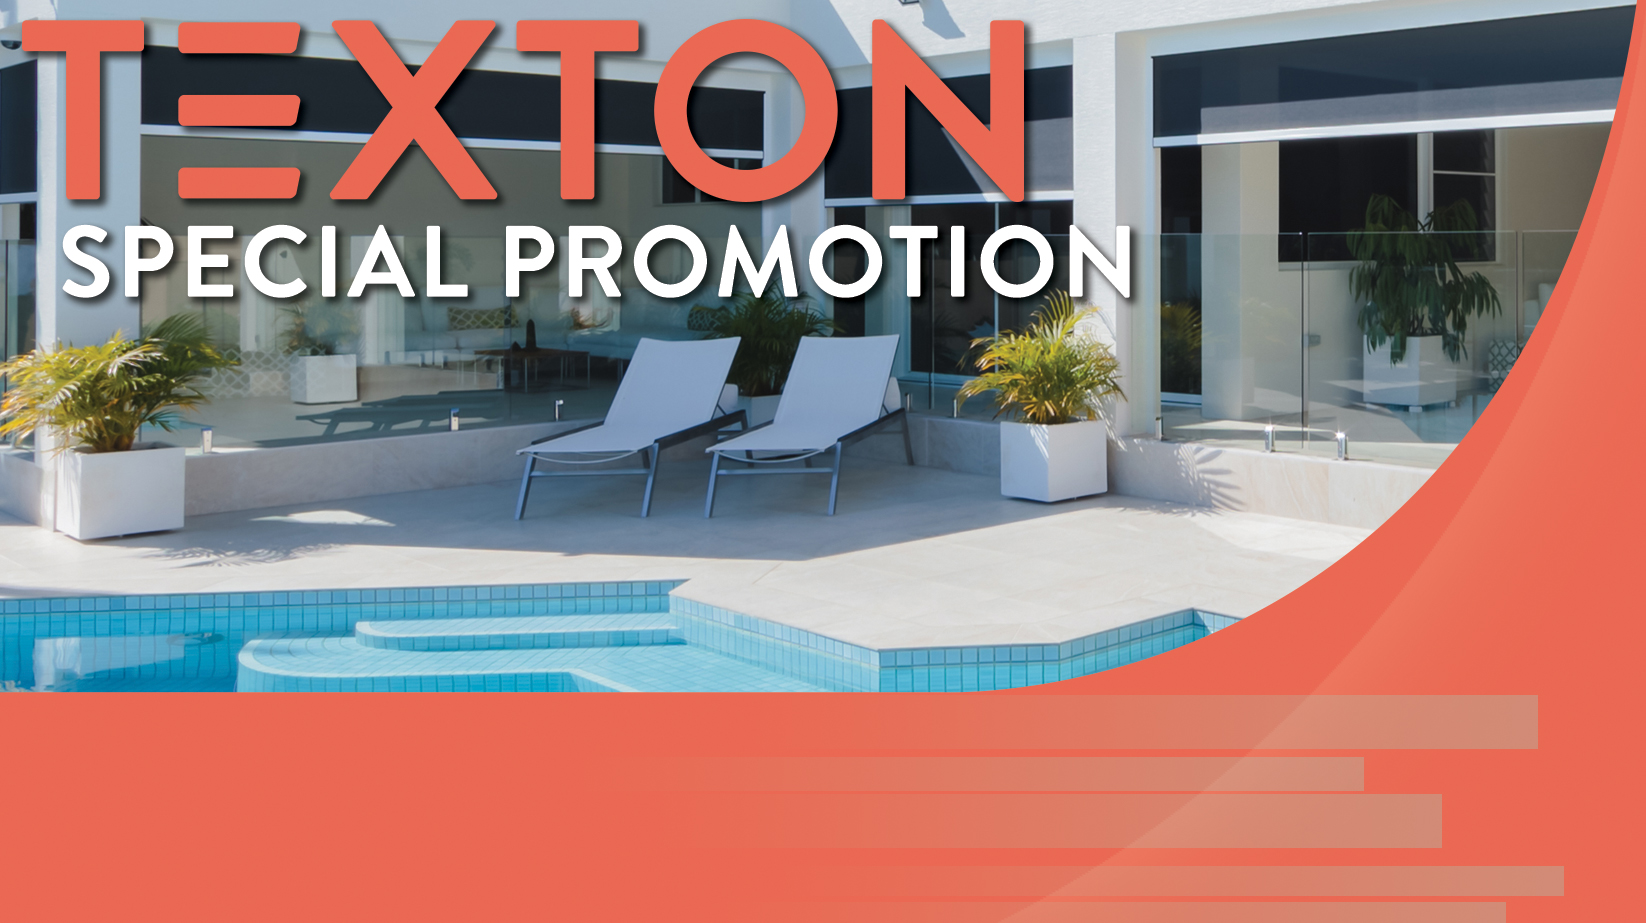 TEXTON SPECIAL PROMOTIONS